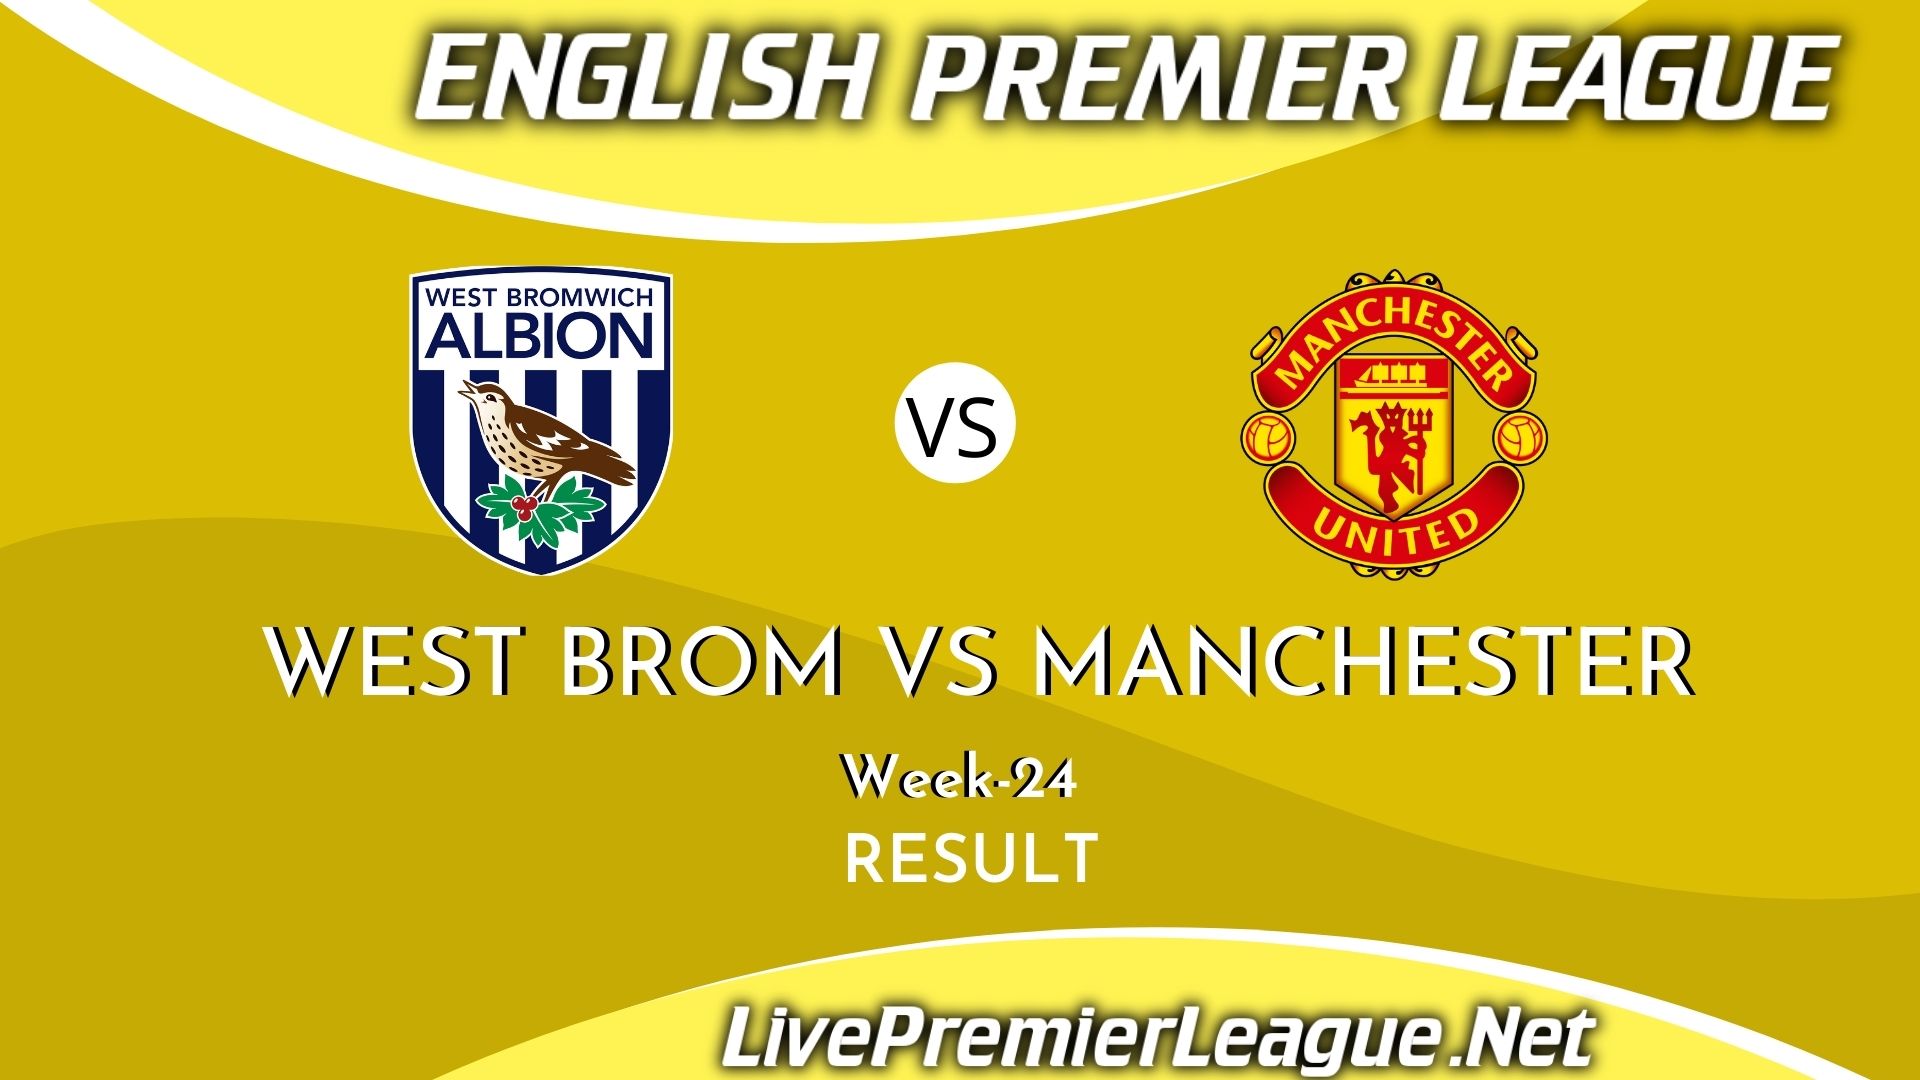 West Bromwich Albion Vs Manchester United | Result 2021 EPL Week 24